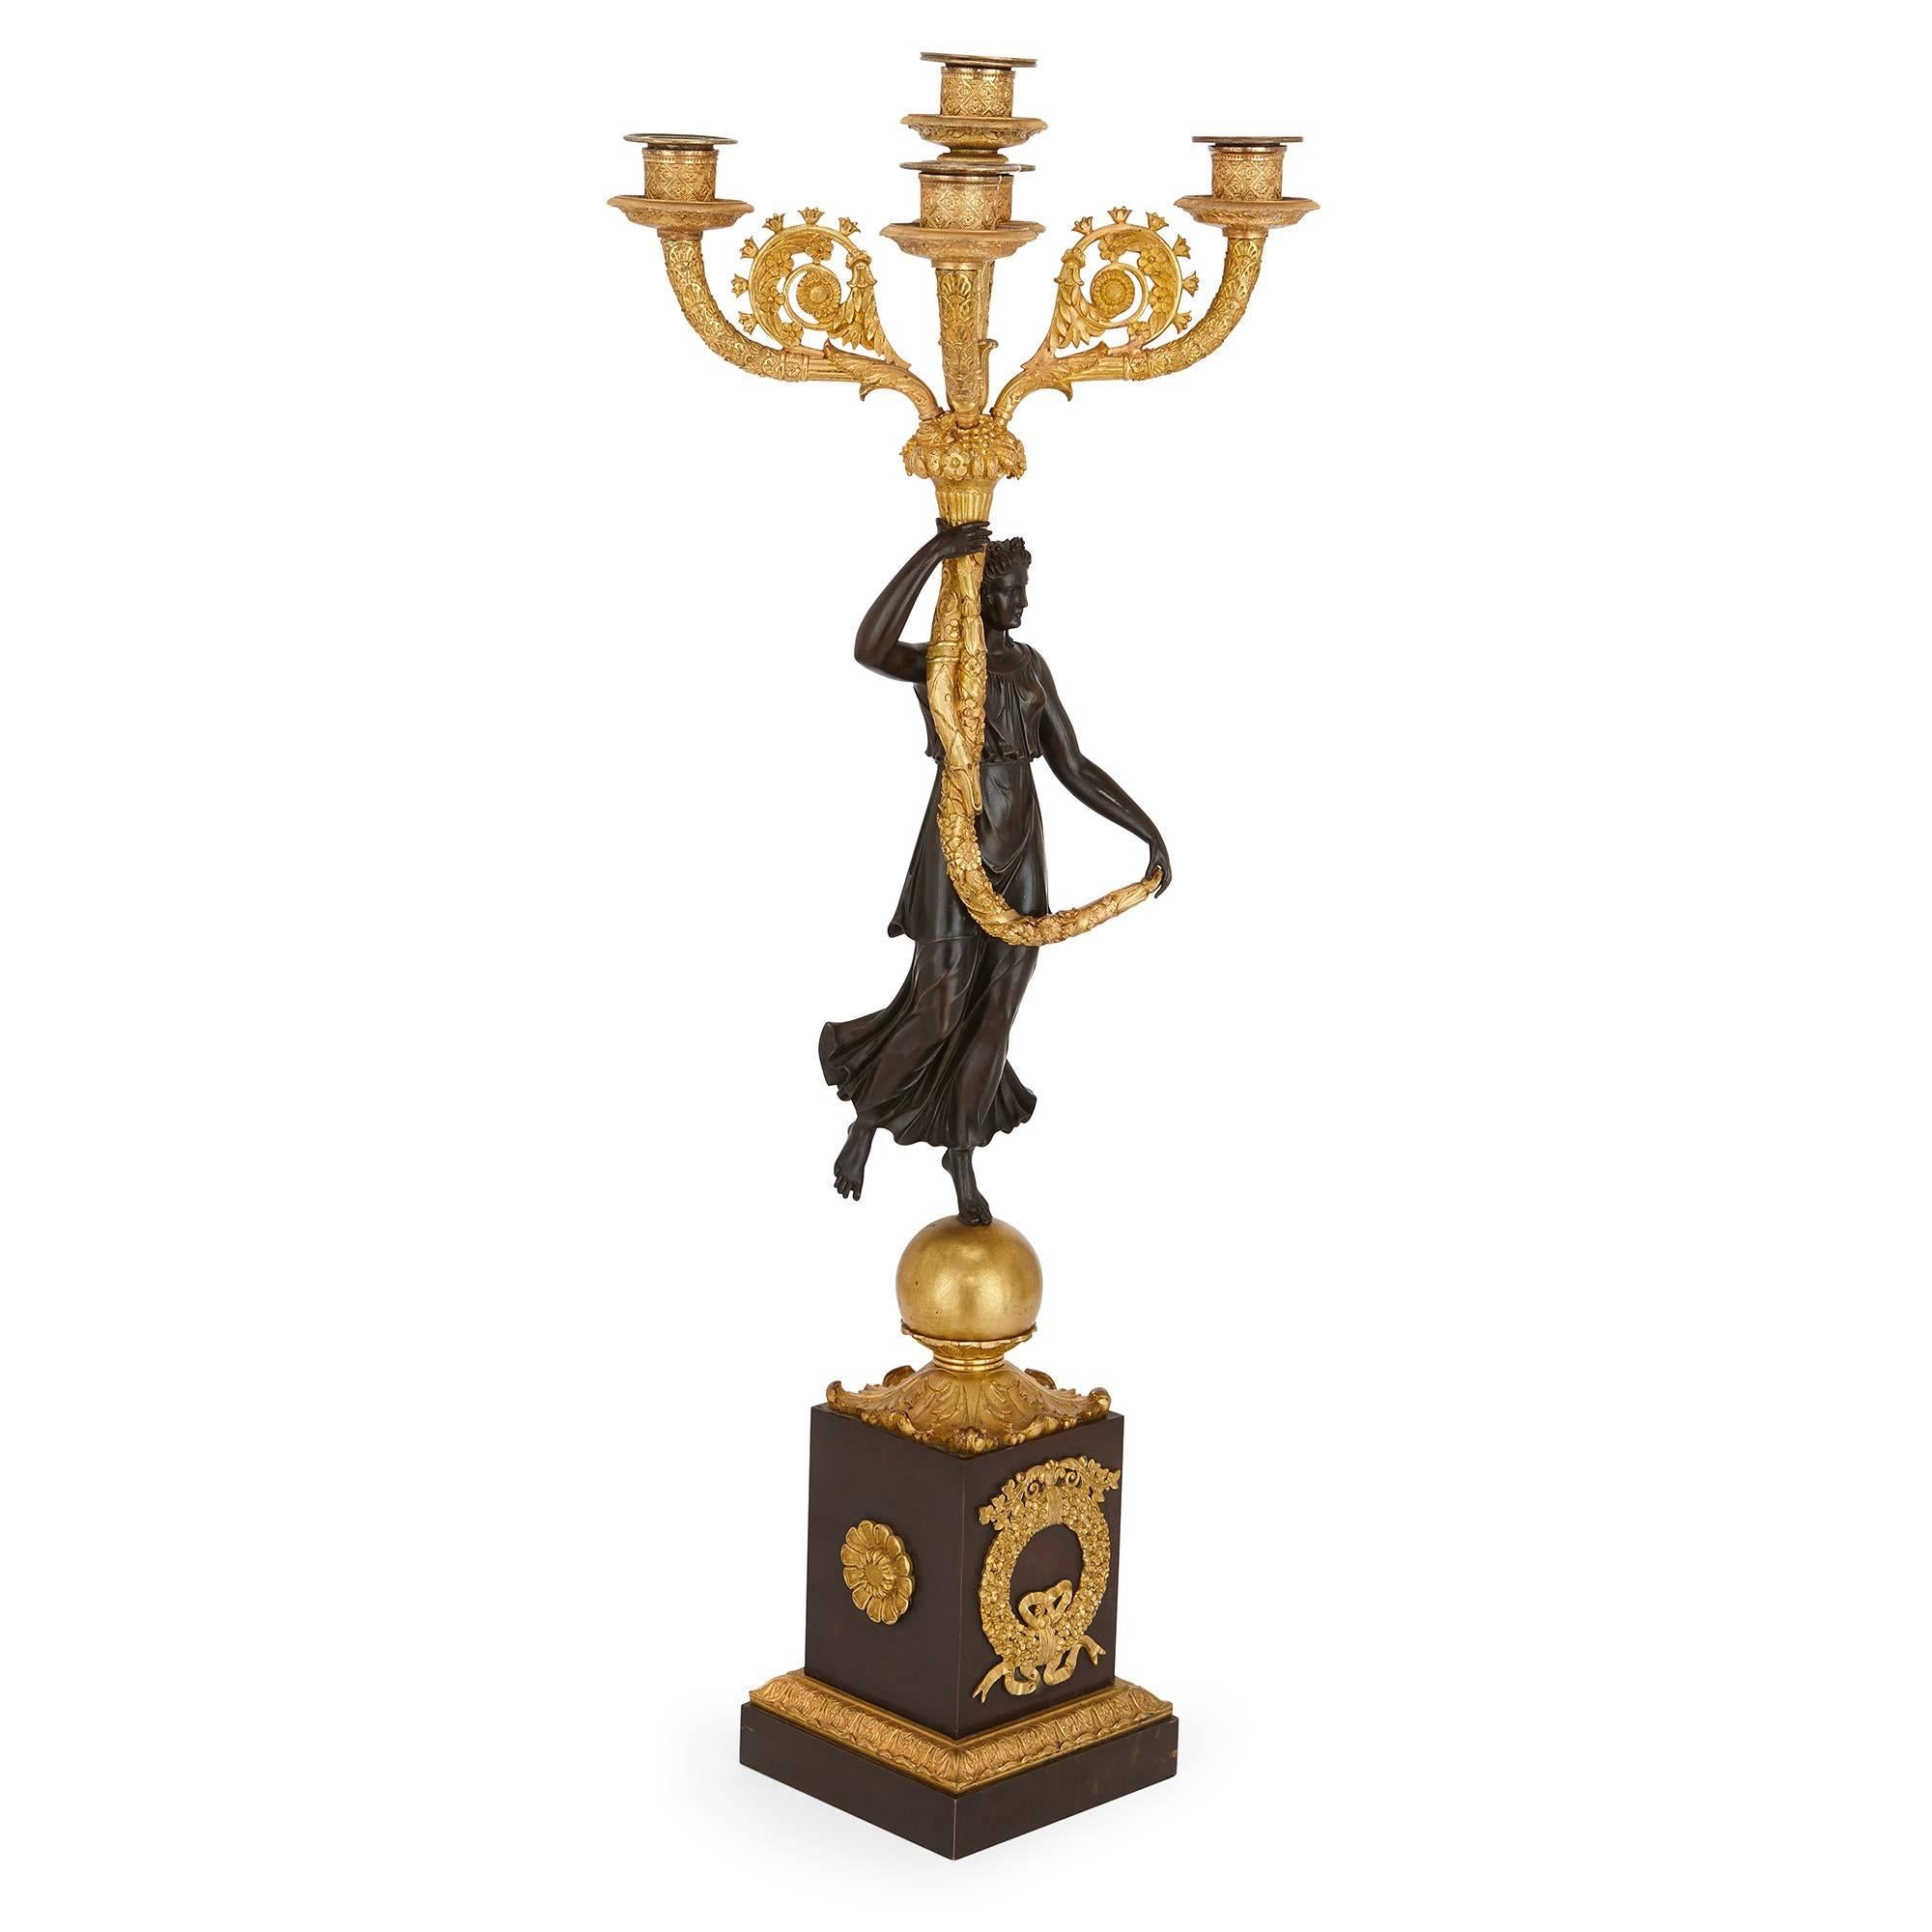 These fine and large French candelabra date from the Empire period of the 19th century and beautifully contrast the different finishes of gilt and patinated bronze. Each piece is modeled as a full length female figure holding aloft a five light